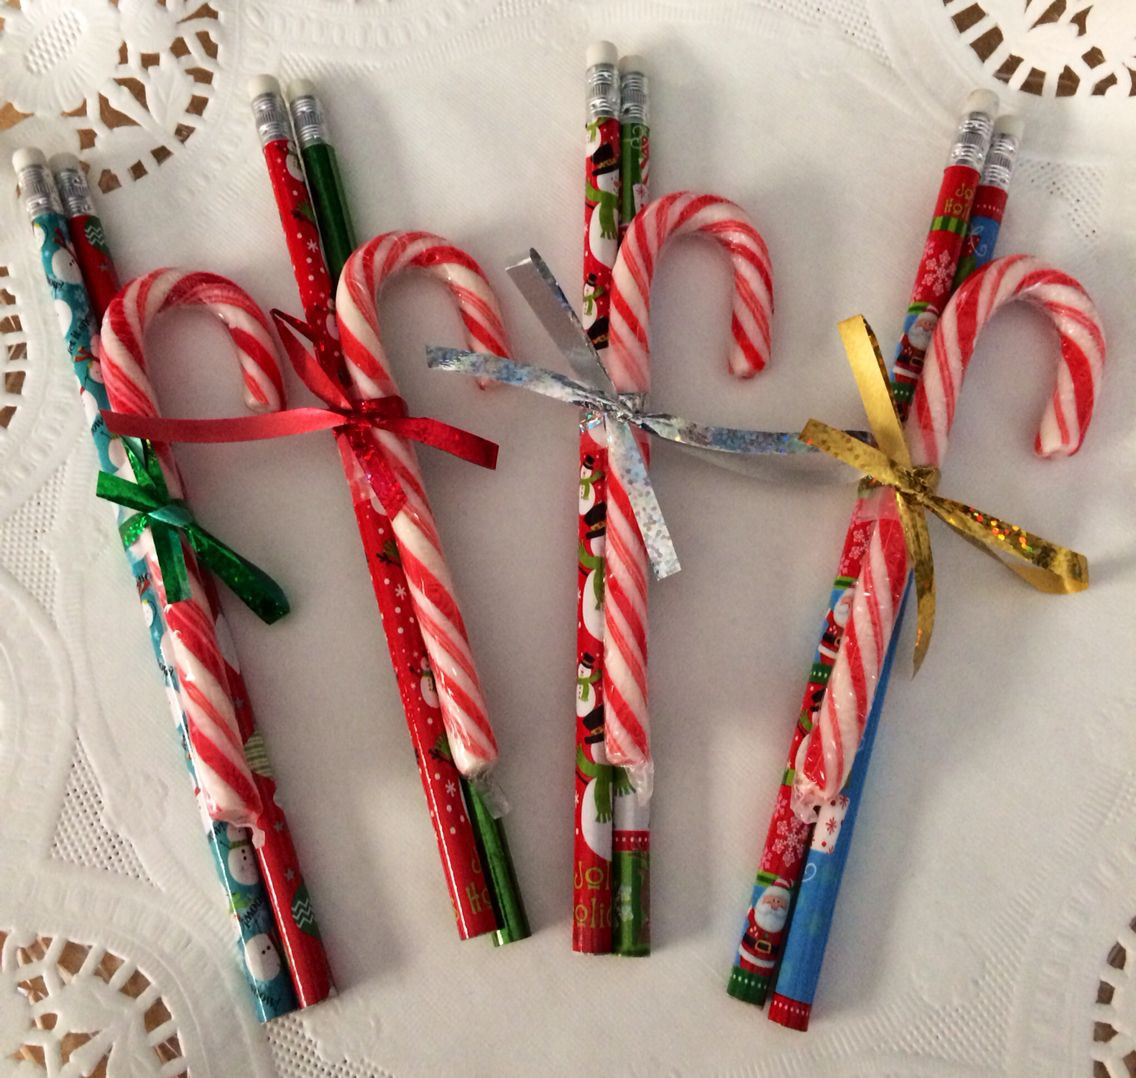 Classroom Christmas Gift Ideas
 Simple and bud friendly I made these as ts for my